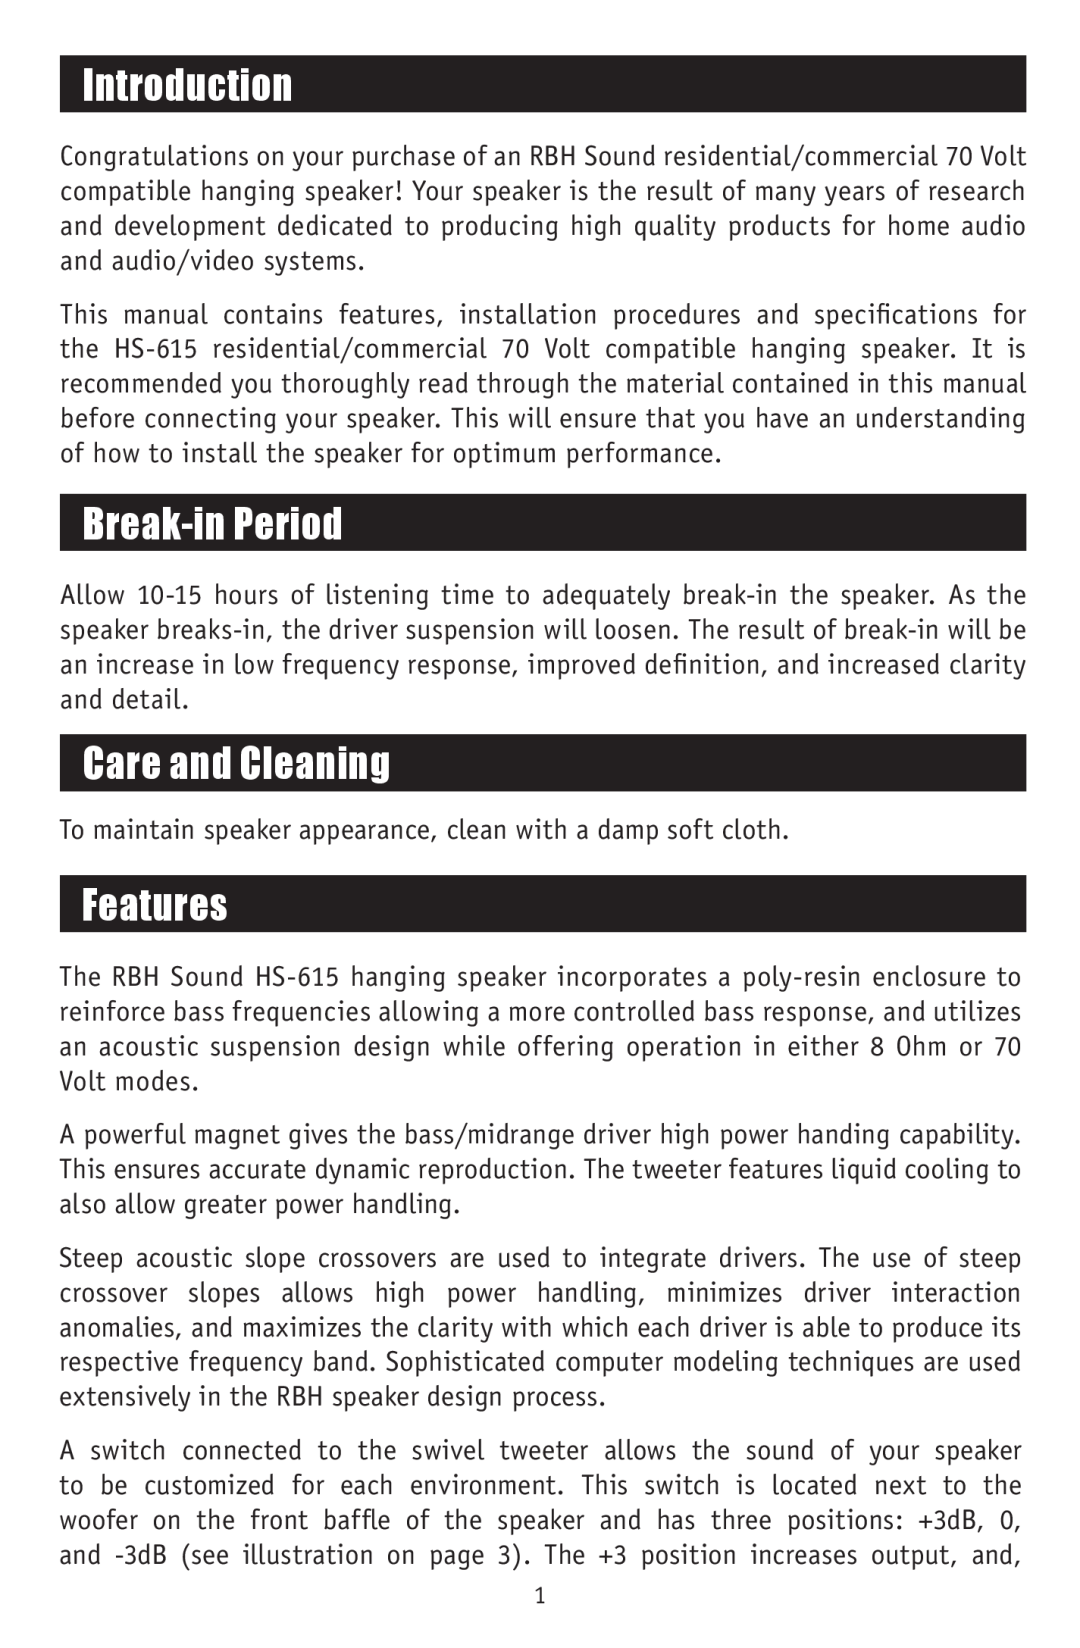 RBH Sound HS-615 owner manual Introduction, Break-inPeriod, Care and Cleaning, Features 